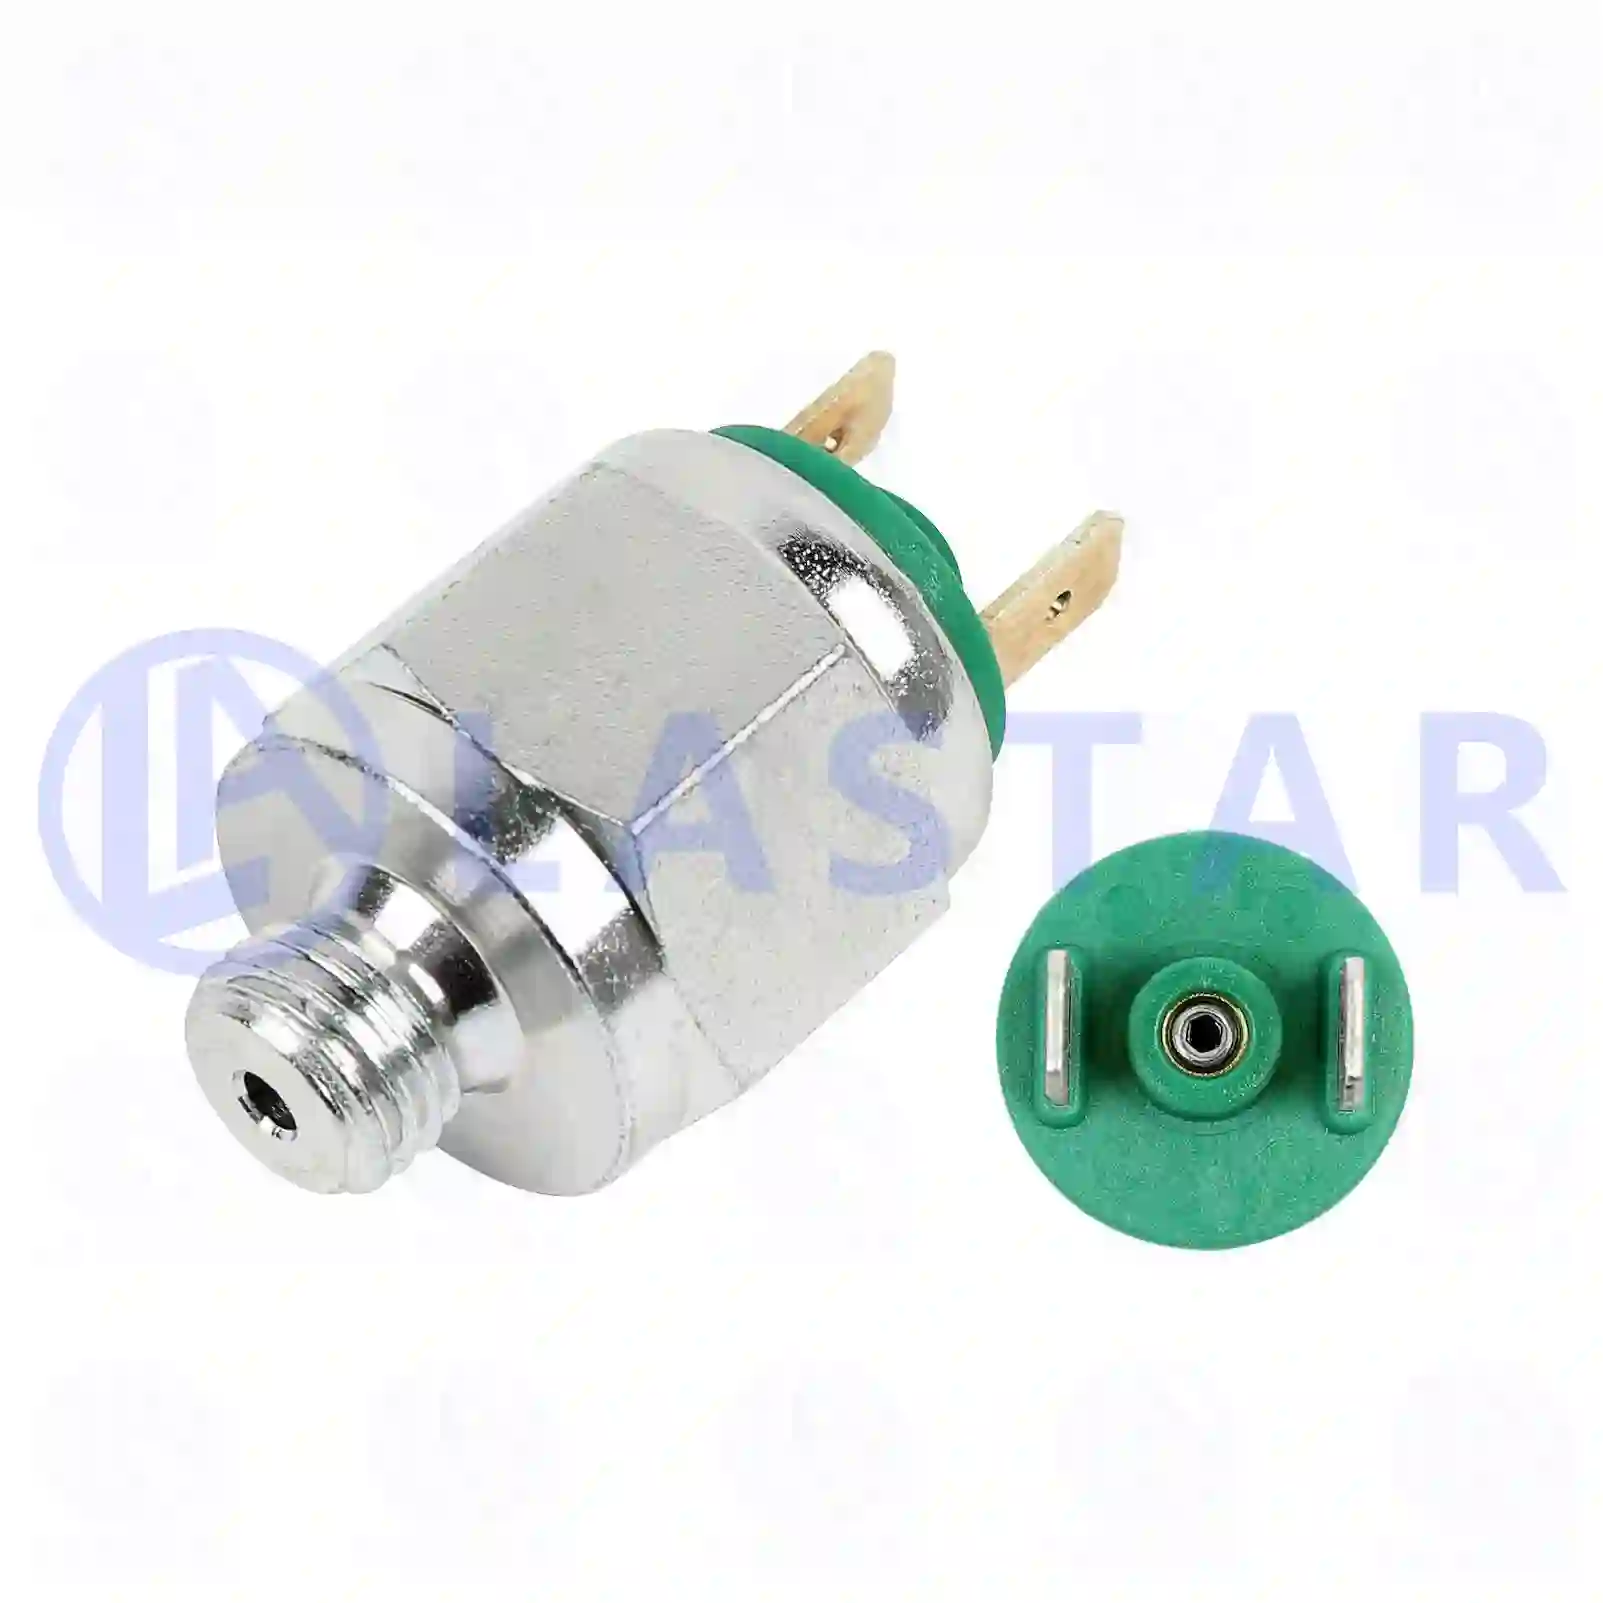 Pressure switch, 77710204, 1332000, 1504932, 1505470, ACHA101, 99700725031, 250045, 03435124, 03435125, 03455124, 3435124, 9441004004, 9441014004, 342025, 81255216013, 81255216019, 88255216208, 90810135242, K0002809687, 0007631710, 0015456024, 011017512, 110278600, 13C3508170AA, 9900005132AA, 5021170115, 1934563, 297807, 393101, 394328, 7314016000, 18026840, 21090340, 96906400, 637201260, 637205120, 1132028, 5236537, 6228623, 6628623, ZG20759-0008 ||  77710204 Lastar Spare Part | Truck Spare Parts, Auotomotive Spare Parts Pressure switch, 77710204, 1332000, 1504932, 1505470, ACHA101, 99700725031, 250045, 03435124, 03435125, 03455124, 3435124, 9441004004, 9441014004, 342025, 81255216013, 81255216019, 88255216208, 90810135242, K0002809687, 0007631710, 0015456024, 011017512, 110278600, 13C3508170AA, 9900005132AA, 5021170115, 1934563, 297807, 393101, 394328, 7314016000, 18026840, 21090340, 96906400, 637201260, 637205120, 1132028, 5236537, 6228623, 6628623, ZG20759-0008 ||  77710204 Lastar Spare Part | Truck Spare Parts, Auotomotive Spare Parts